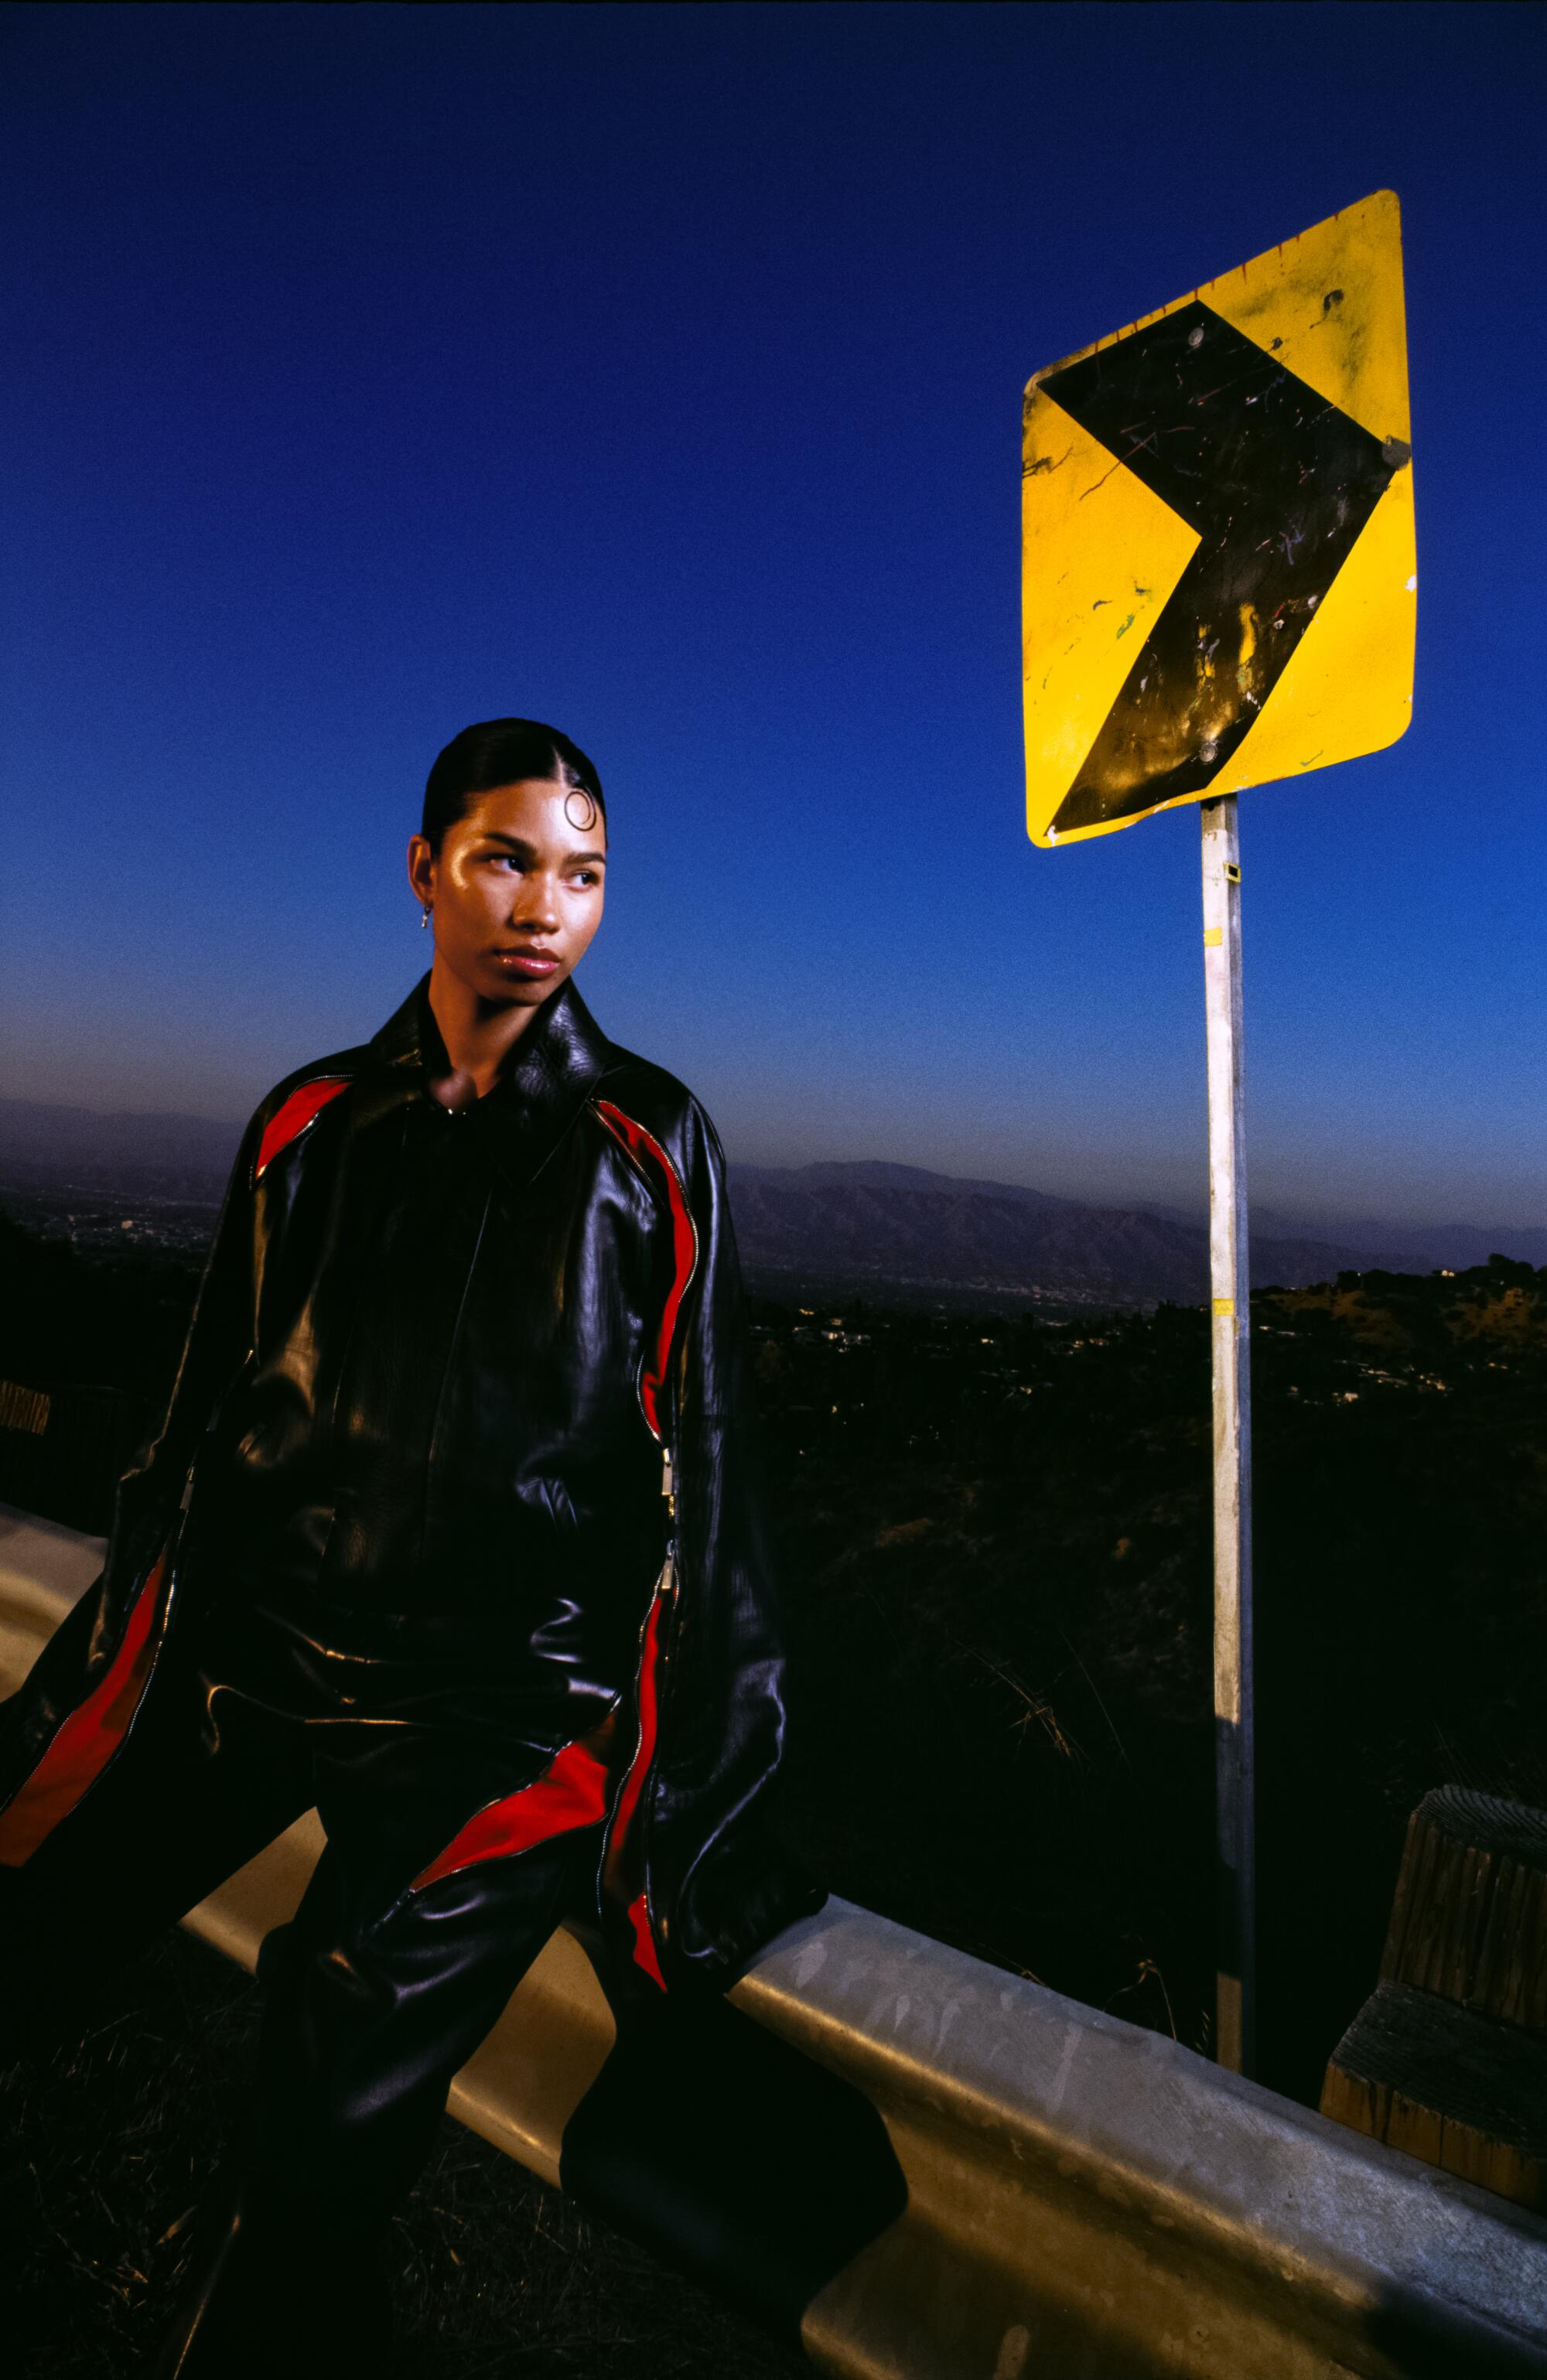 A model wears Ferragamo leather jacket and pants and stands next to a yellow road sign.